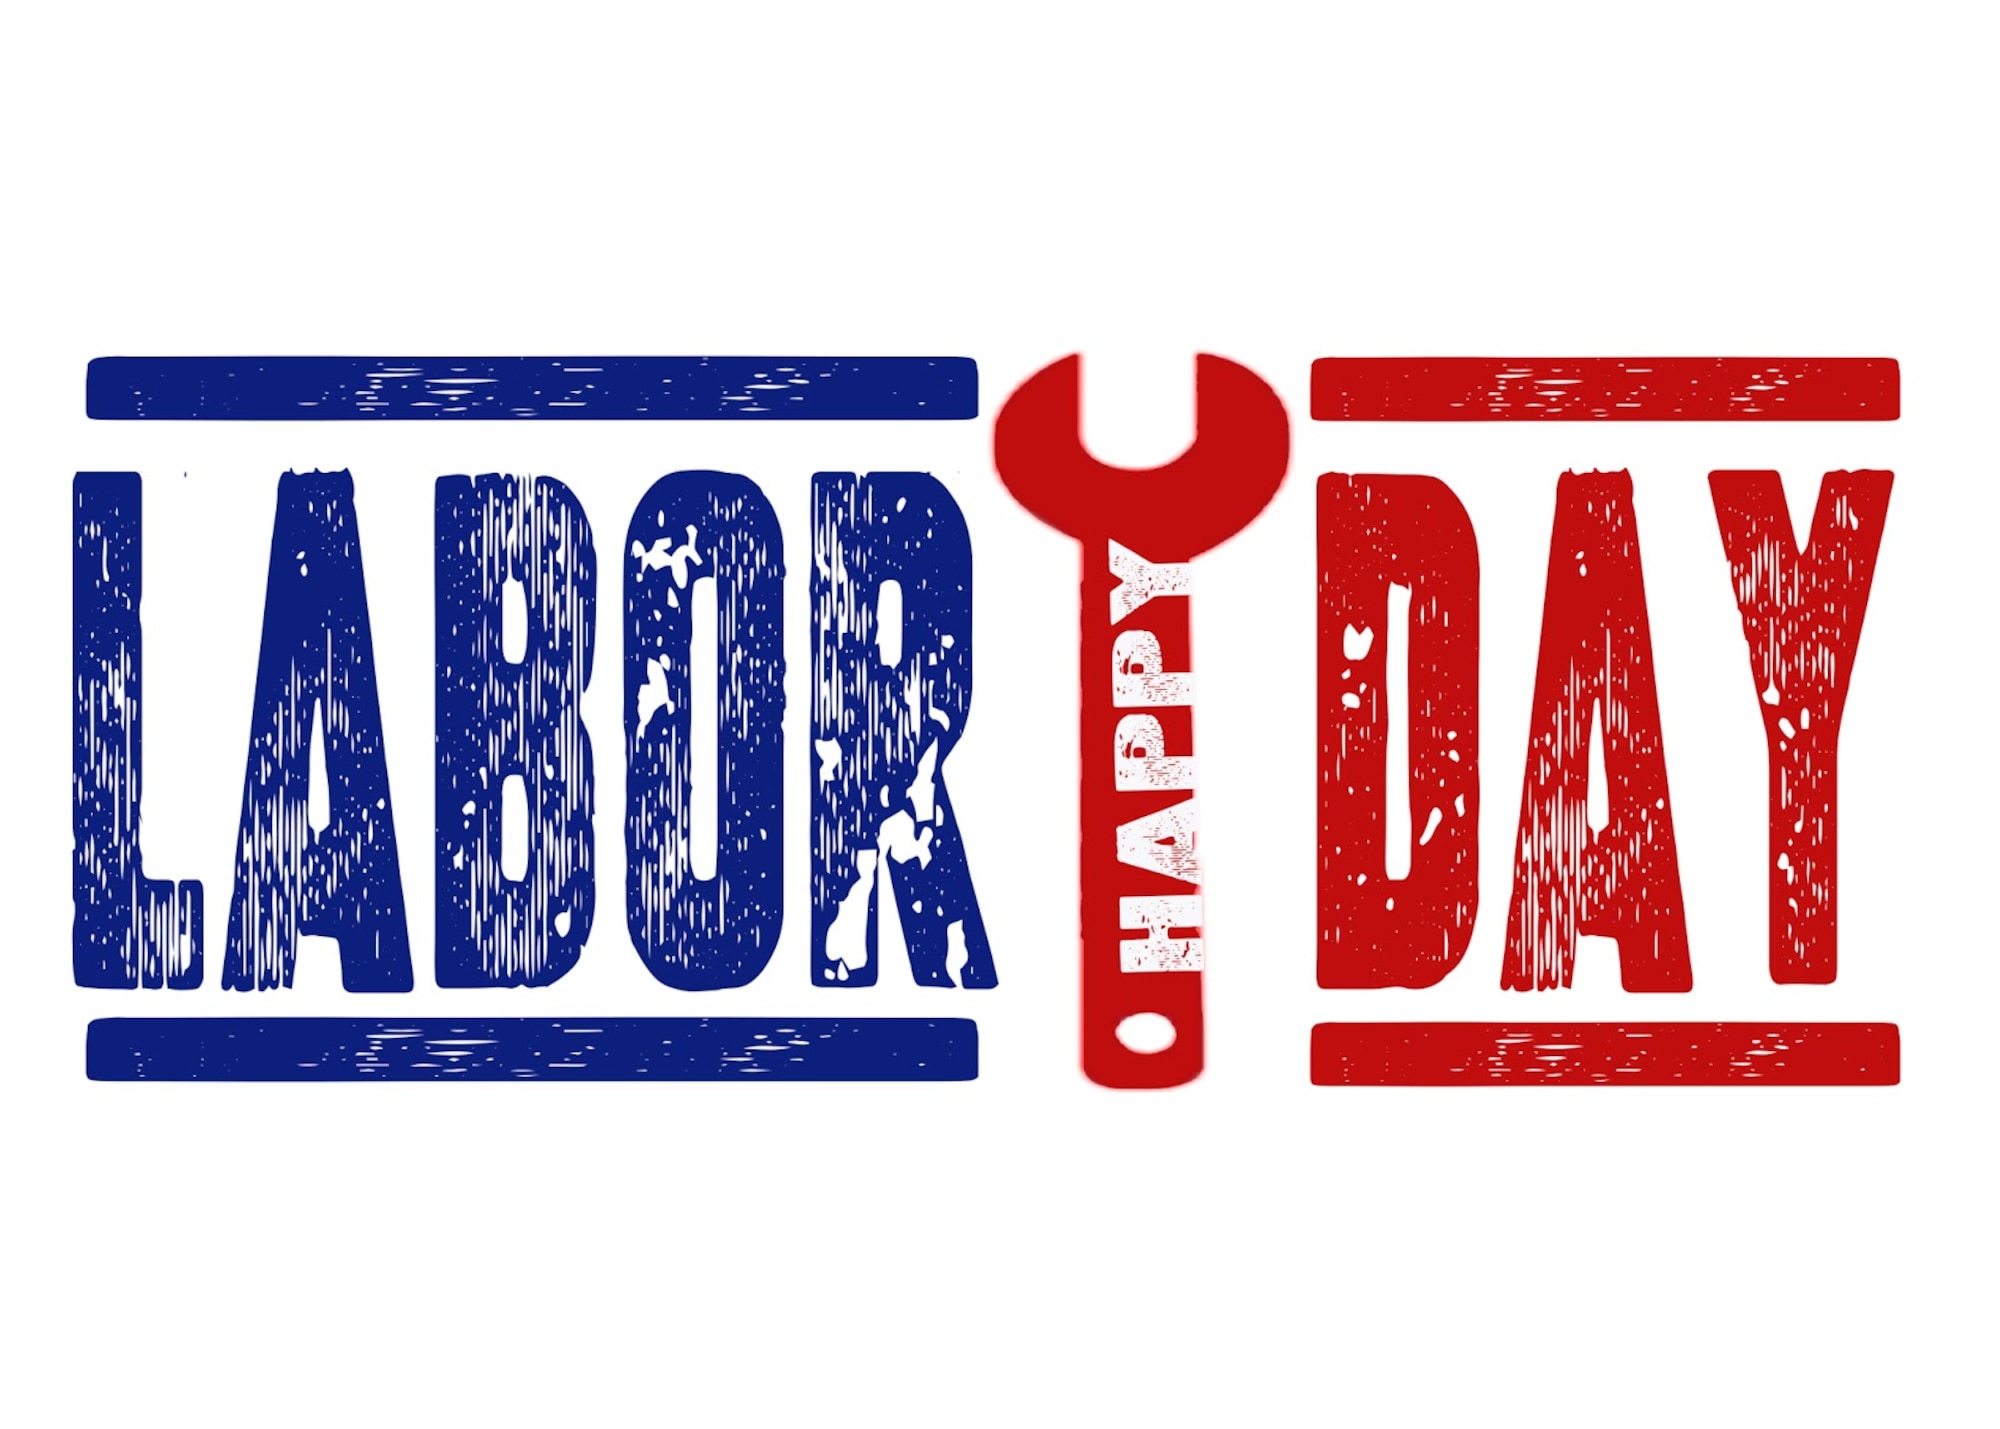 Grissom wishes everyone a happy Labor Day